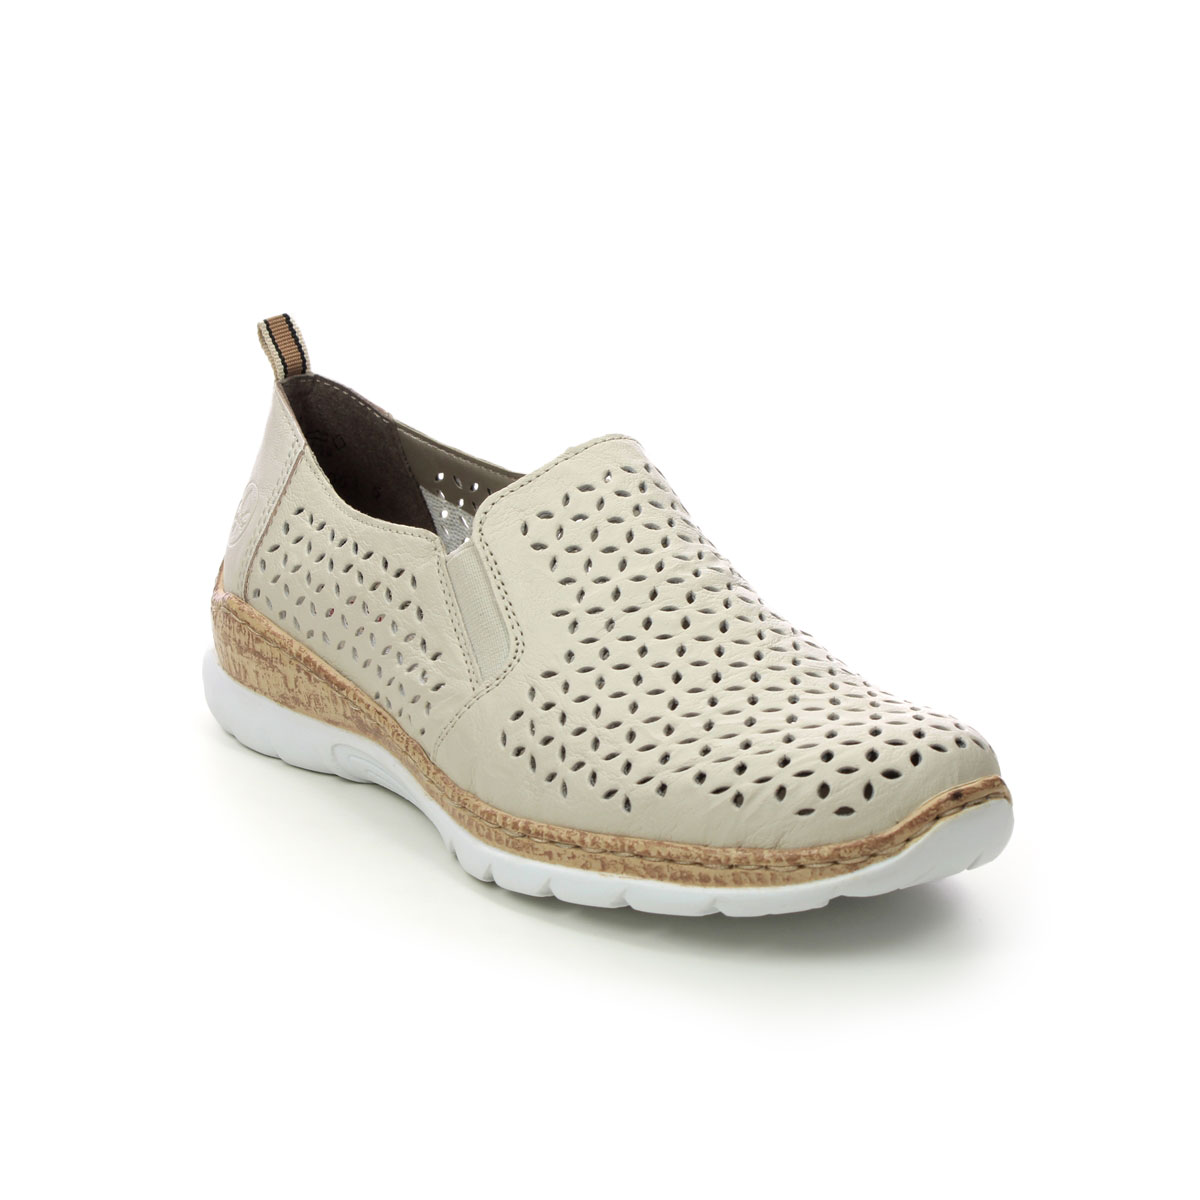 Rieker Empilucco Off White Leather Womens Comfort Slip On Shoes N4251-60 In Size 40 In Plain Off White Leather